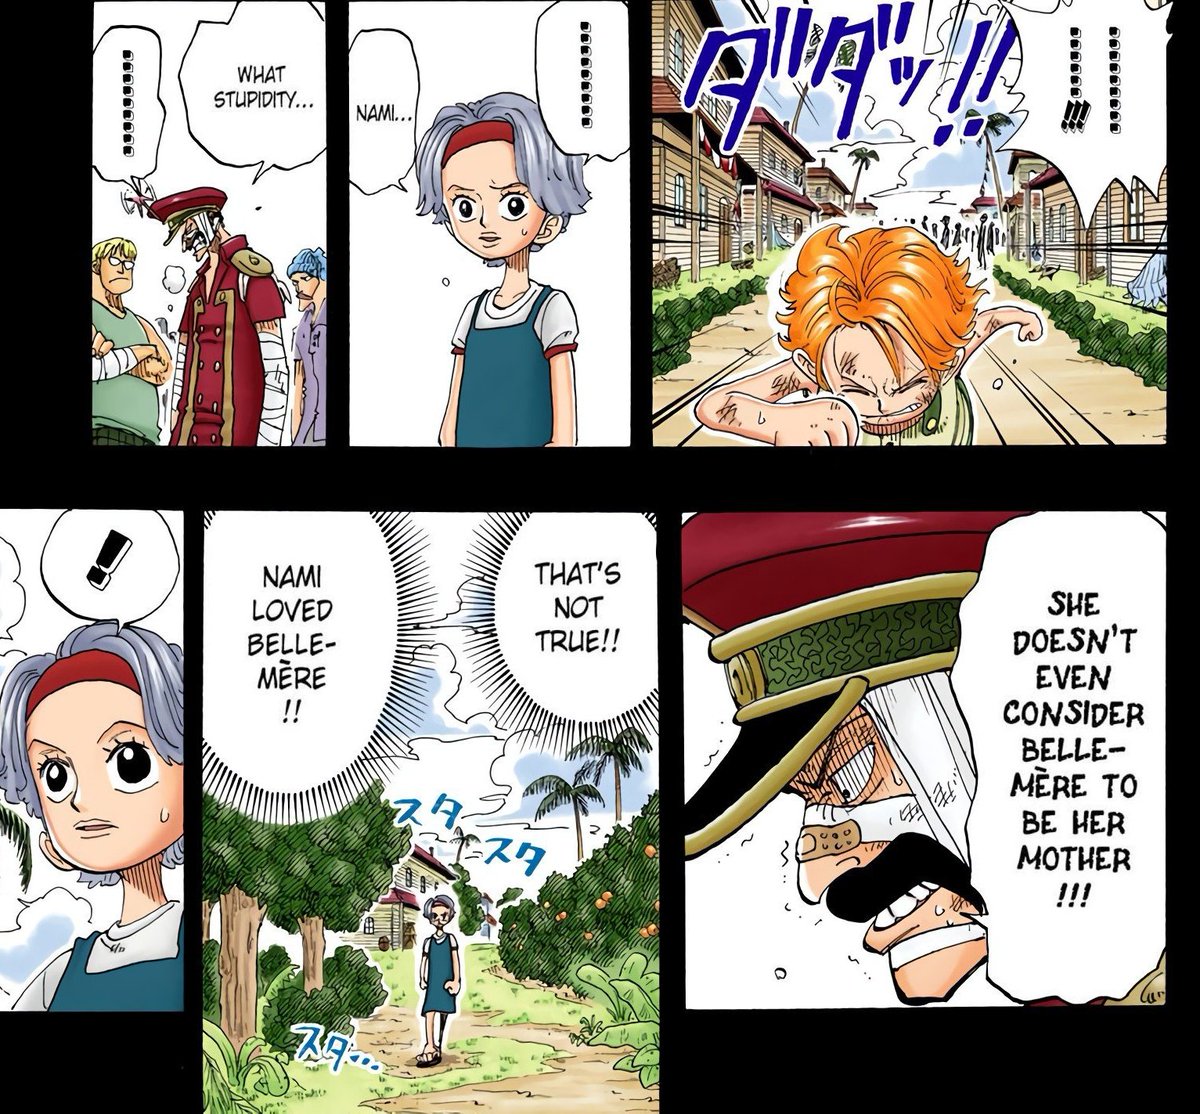 Some could be confused because of the awful live action script, but this was Nojiko when Nami was taken by Arlong. While the village gave up on her, she didn't rest until she understood the real reason.

Nojiko leaving in the middle of such reveal is not normal. #ONEPIECE1115